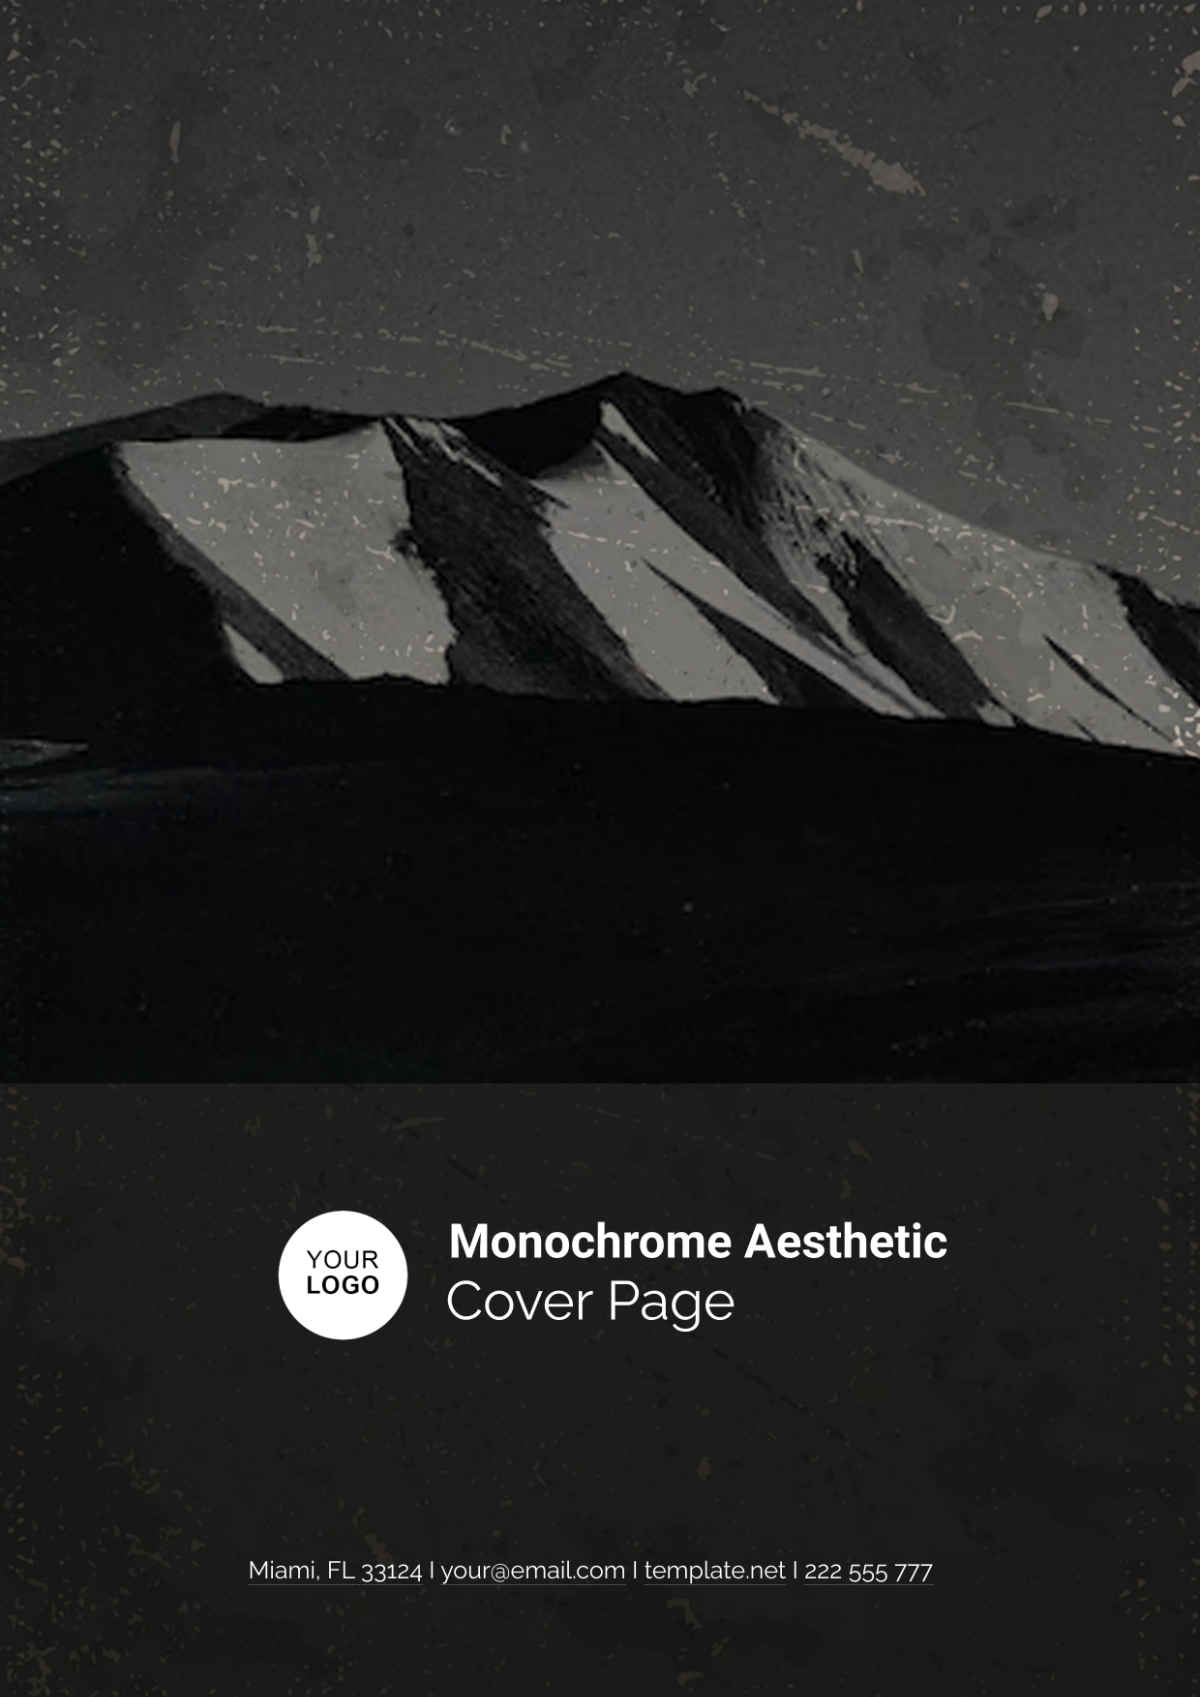 Free Monochrome Aesthetic Cover Page Template